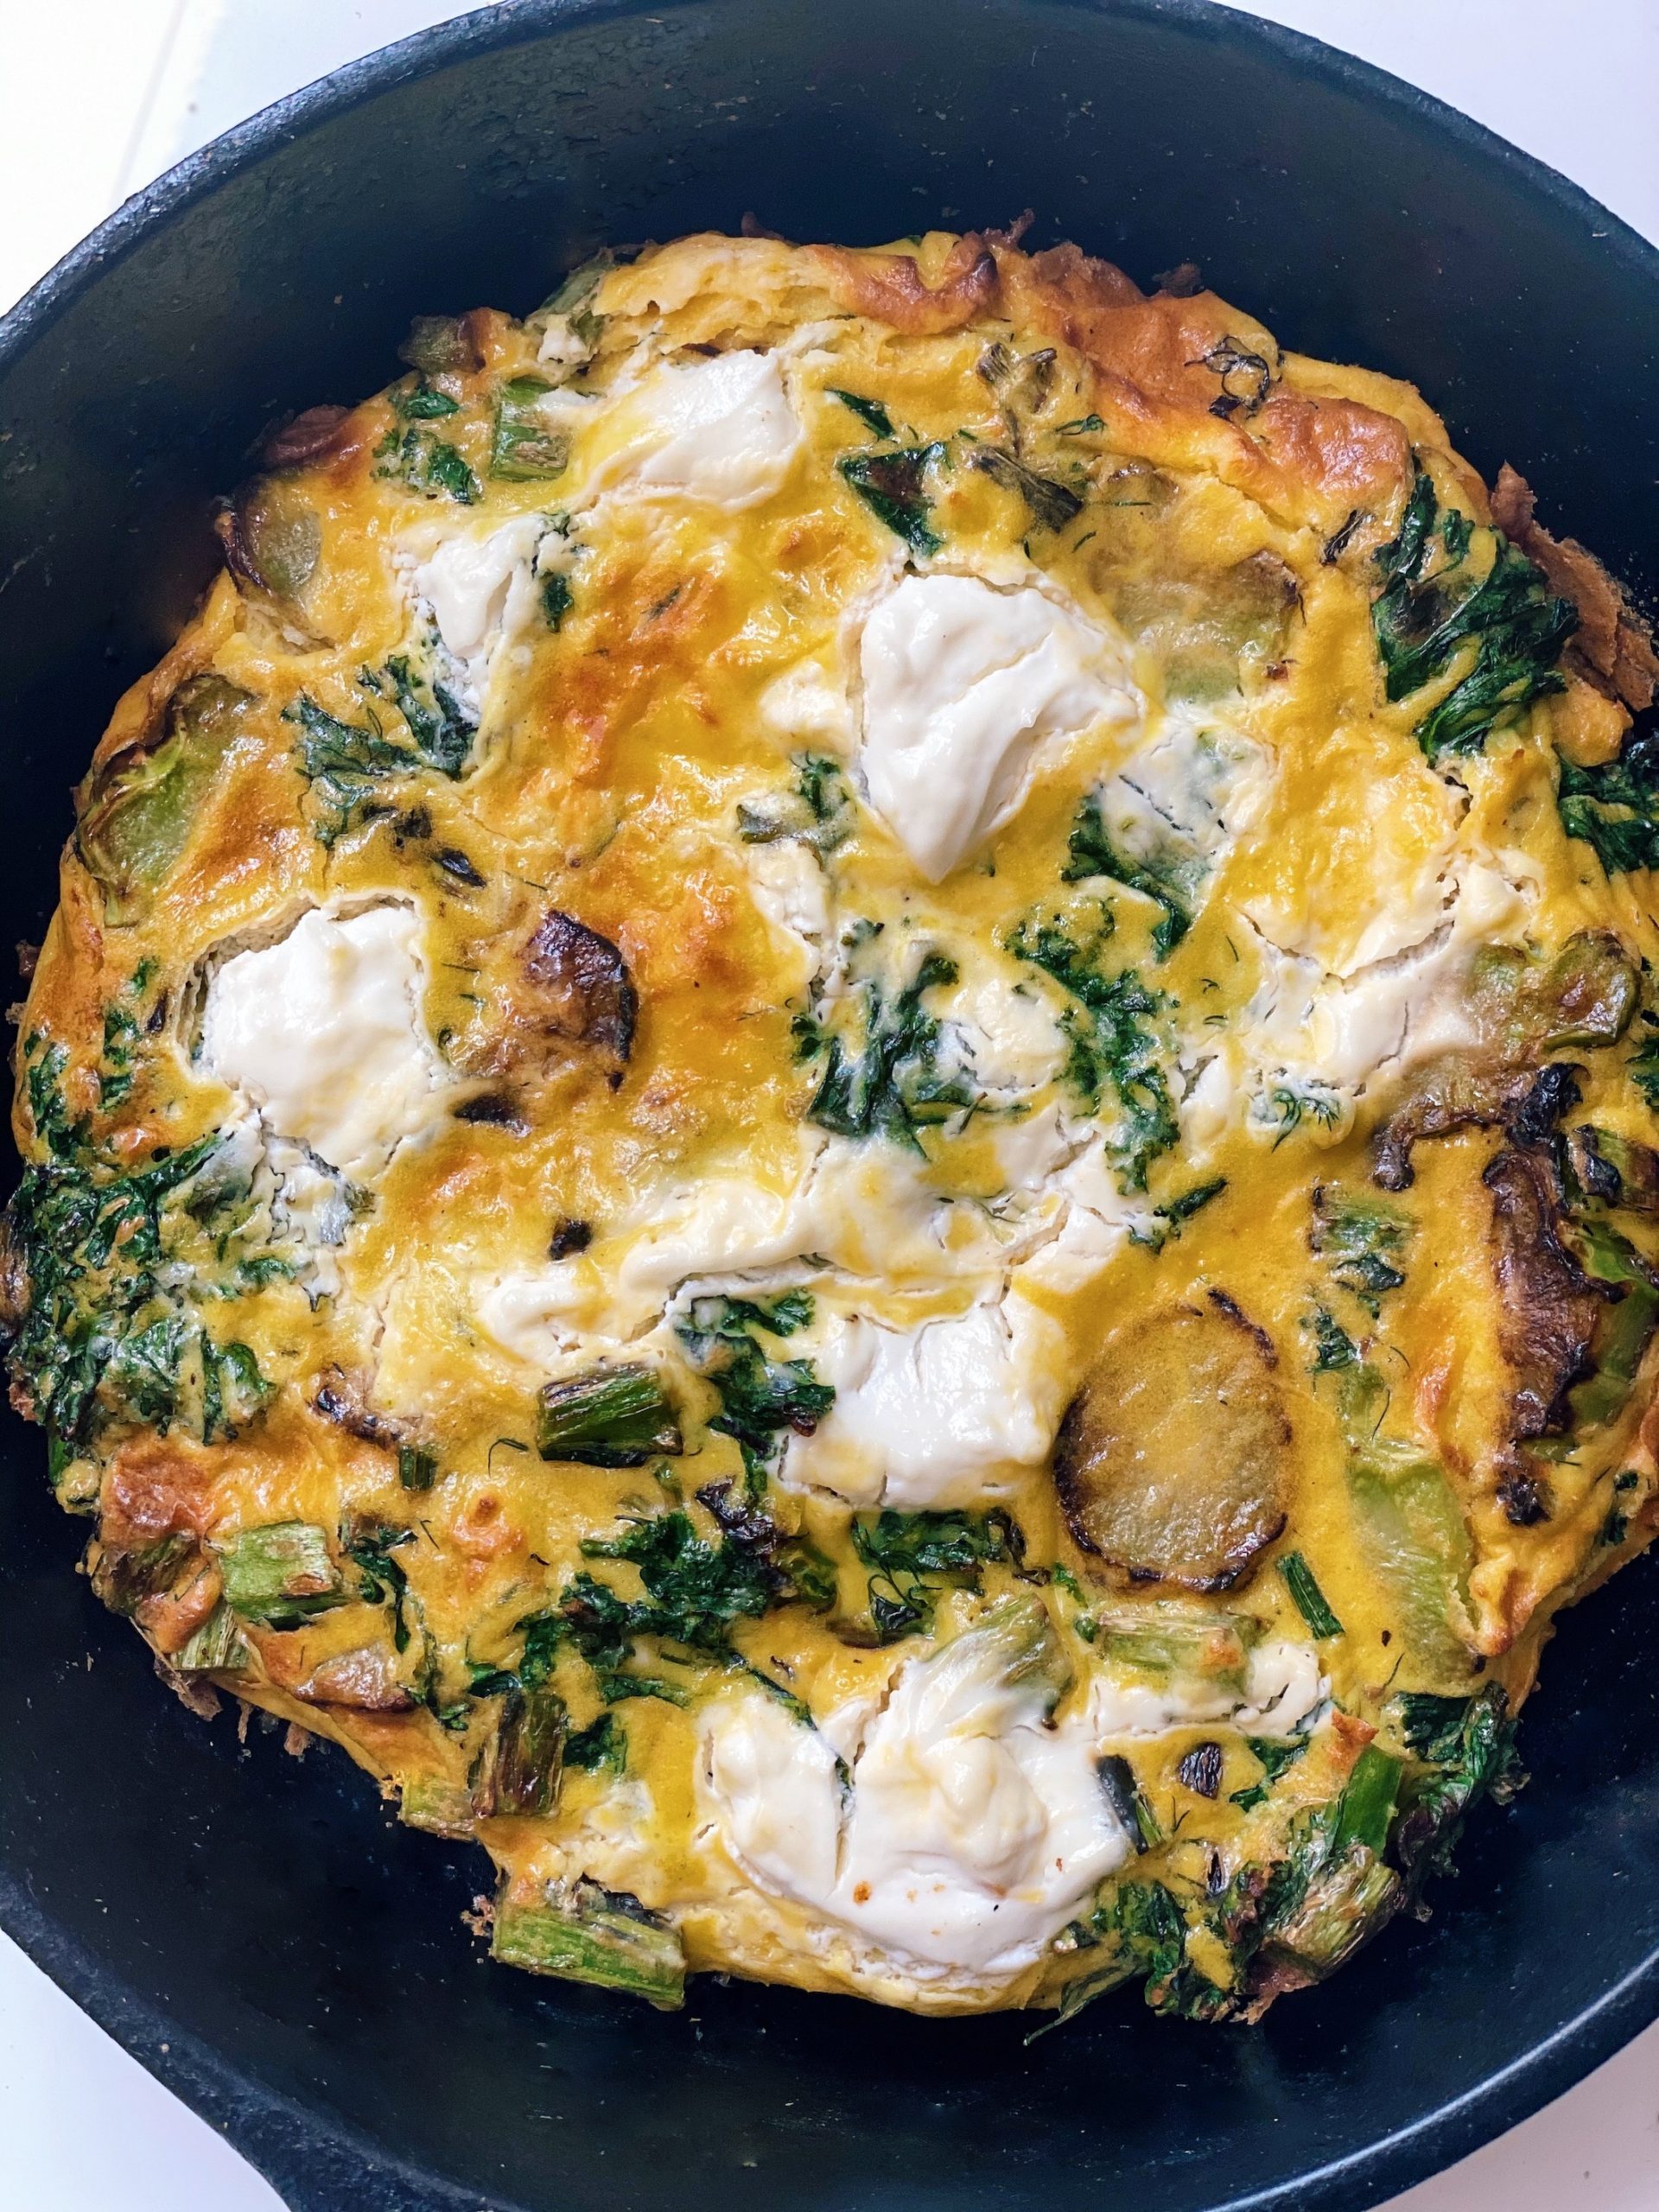 kale and broccoli stem frittata with dill and sour cream